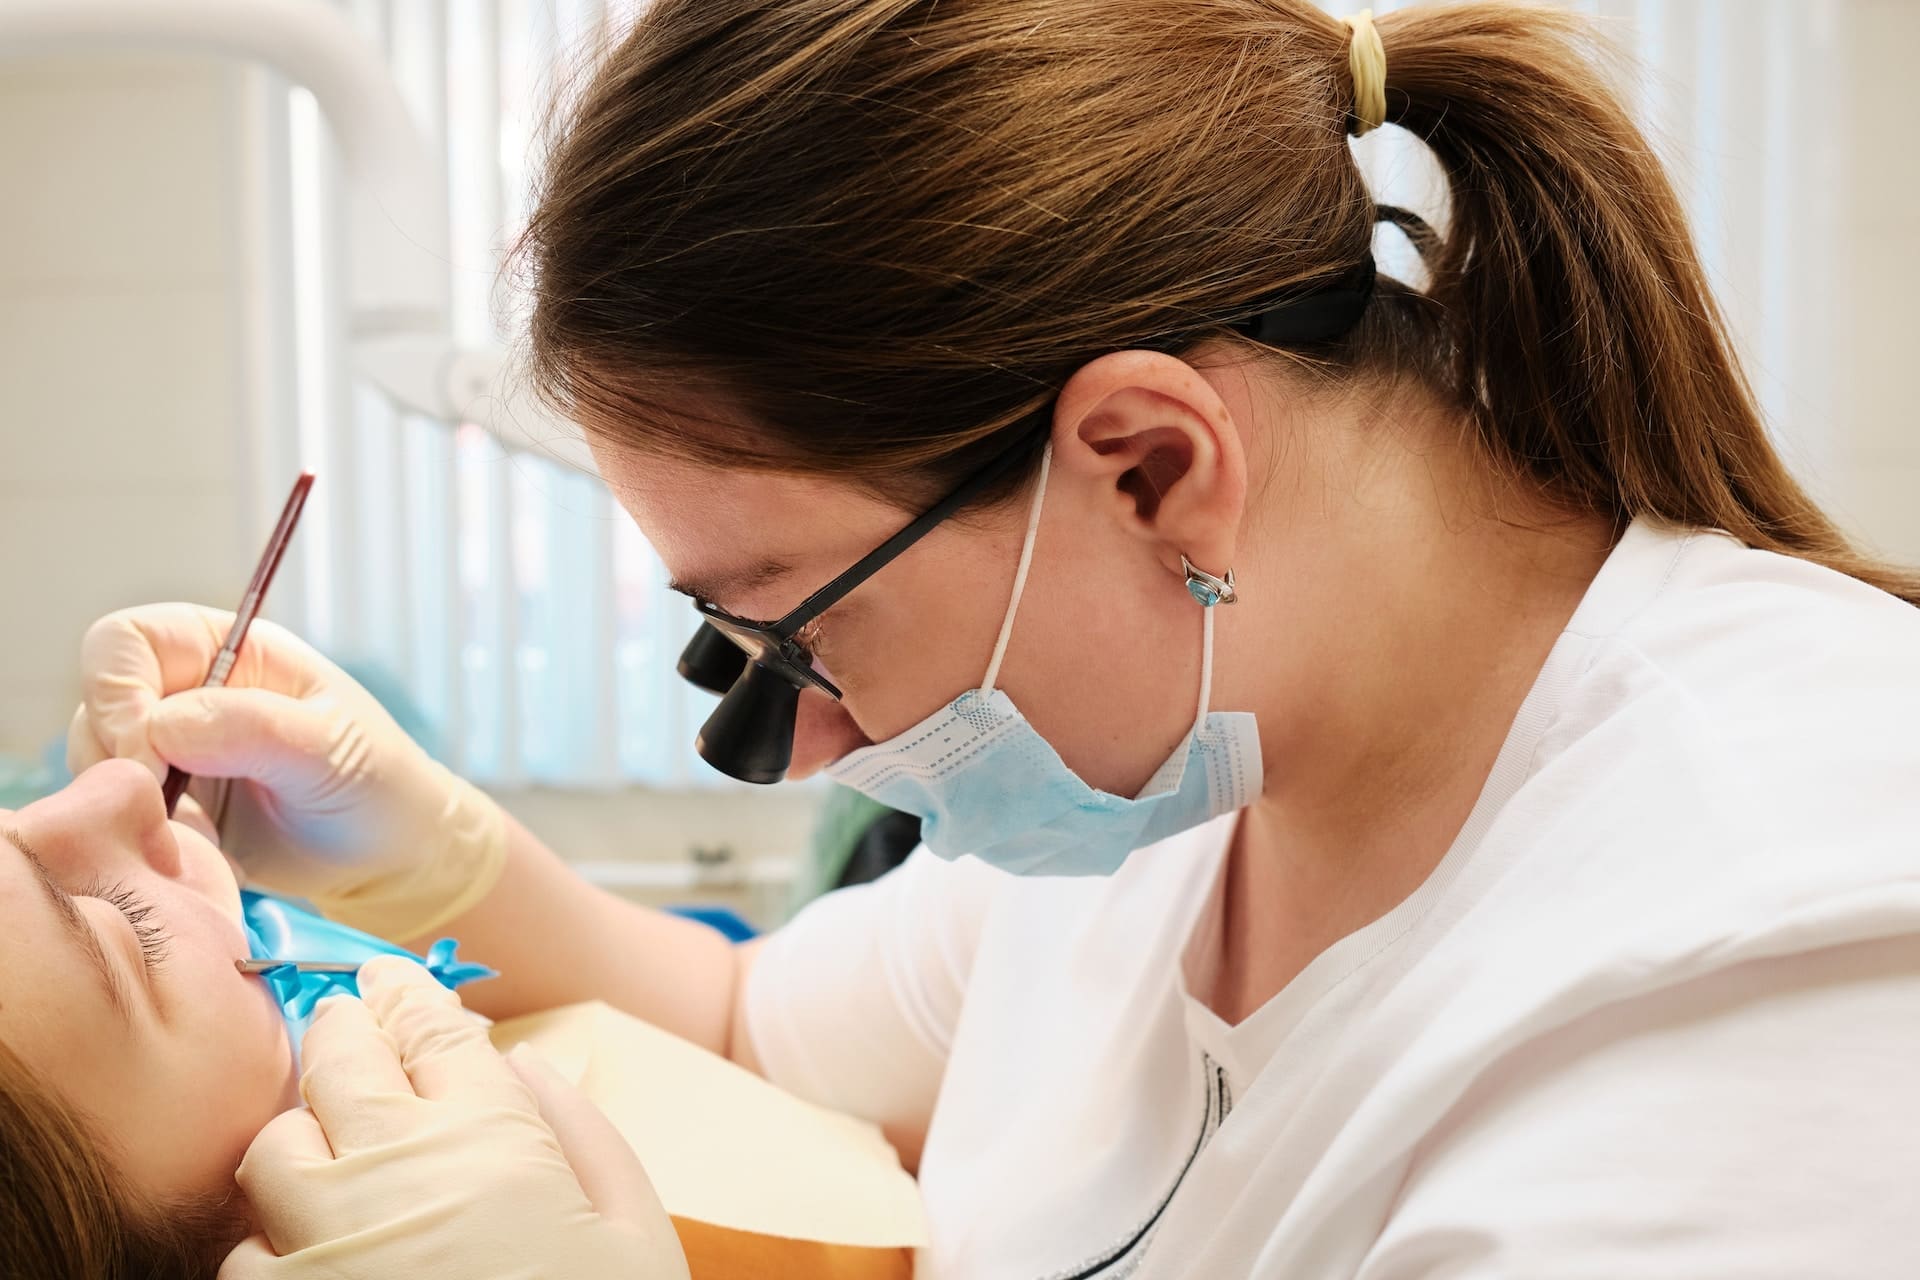 Focused dentist closely examining patient's teeth with the assistance of dental microscopic glasses.